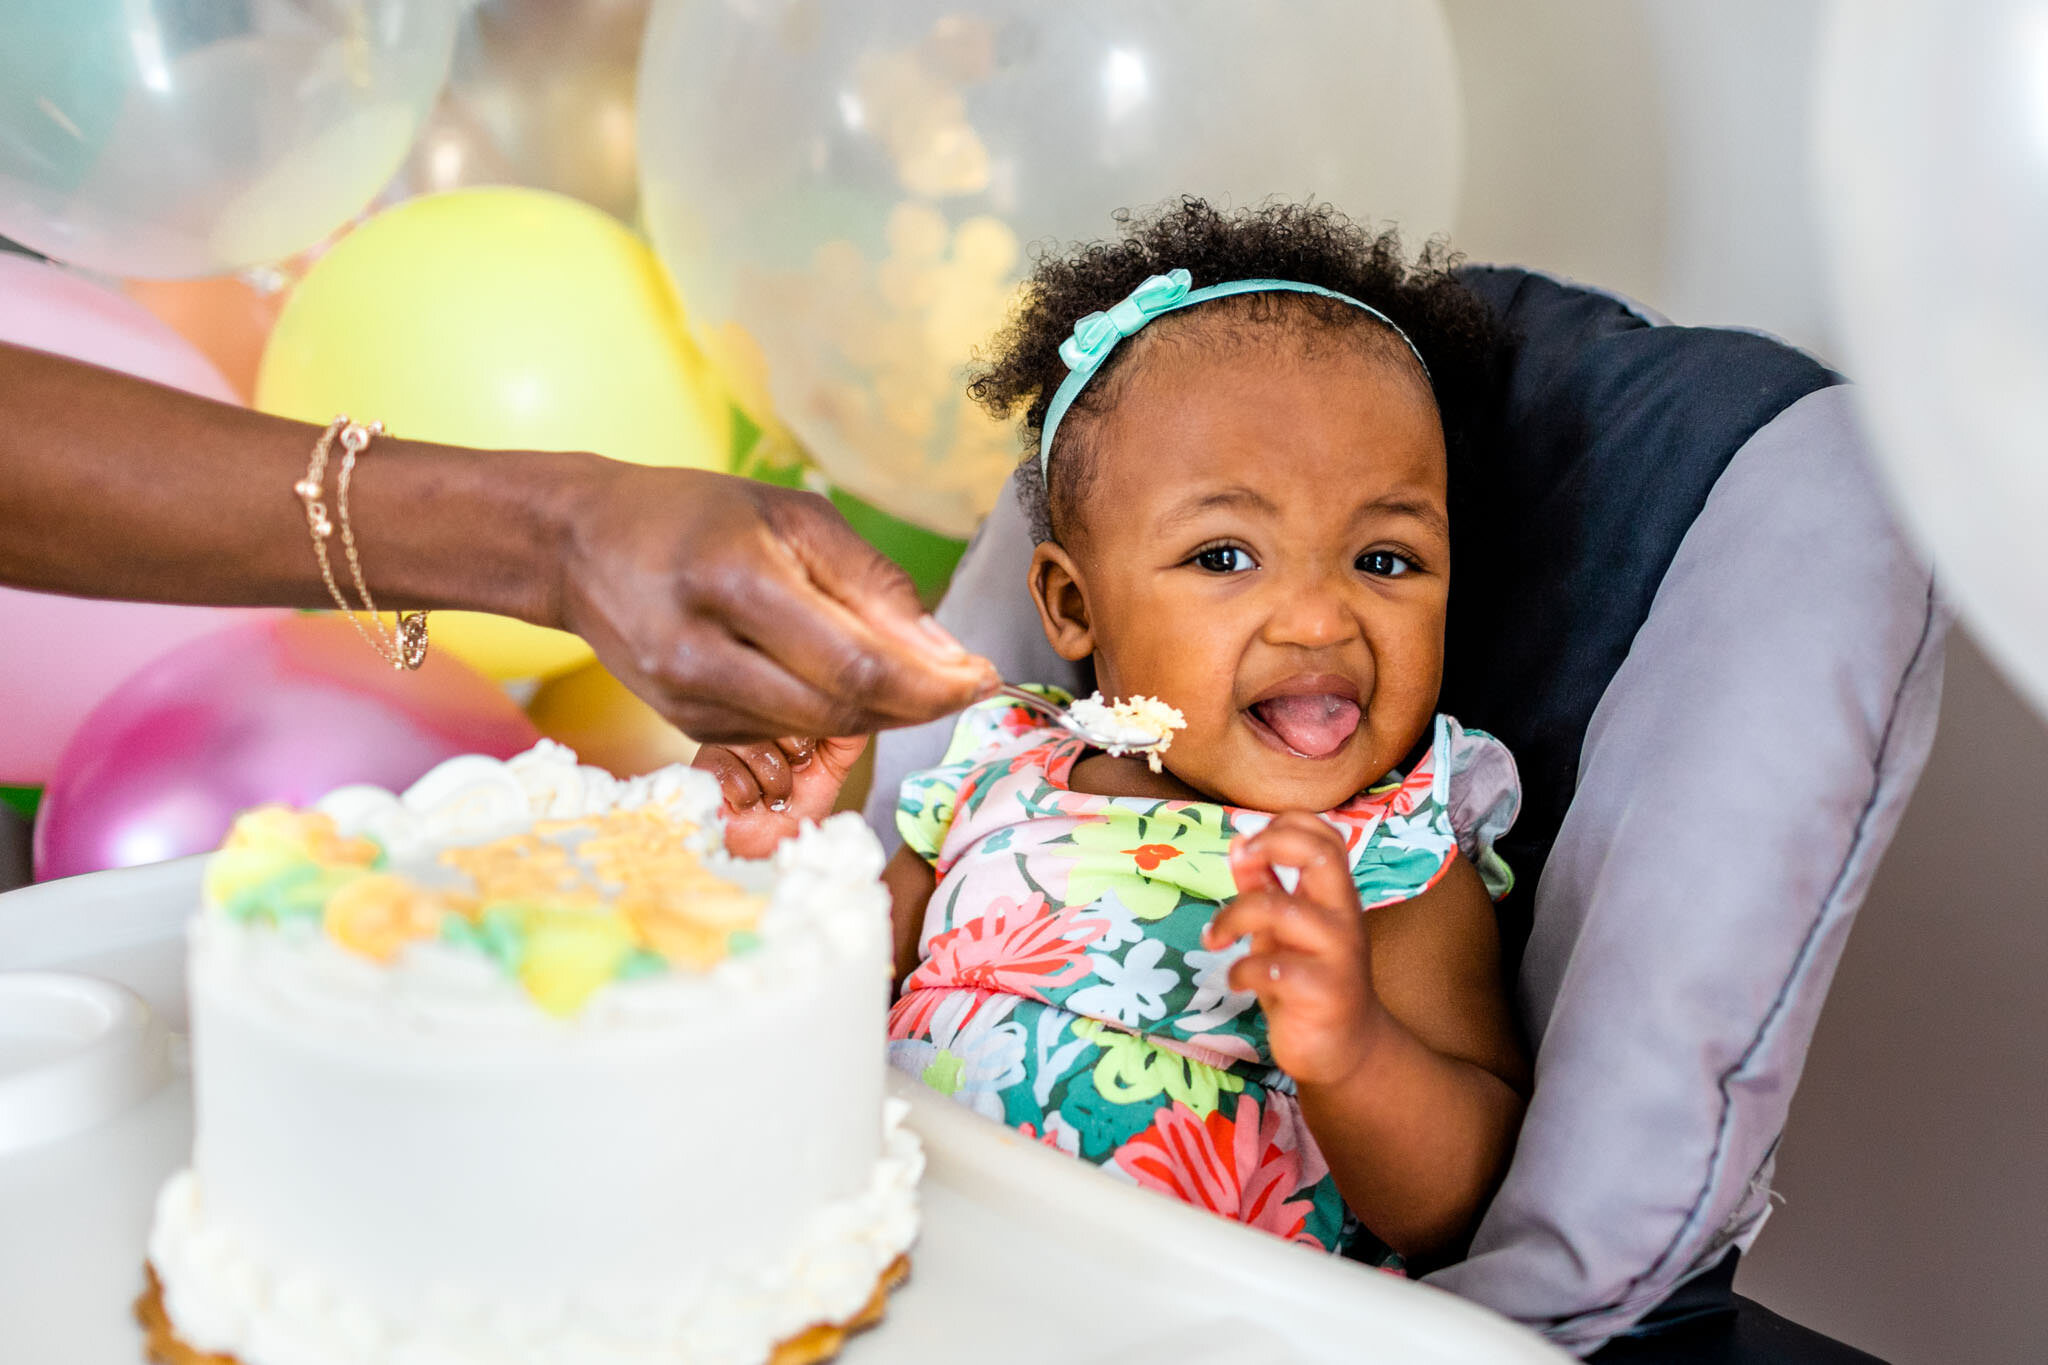 Durham Family Photographer | By G. Lin Photography | Baby girl turning away from cake